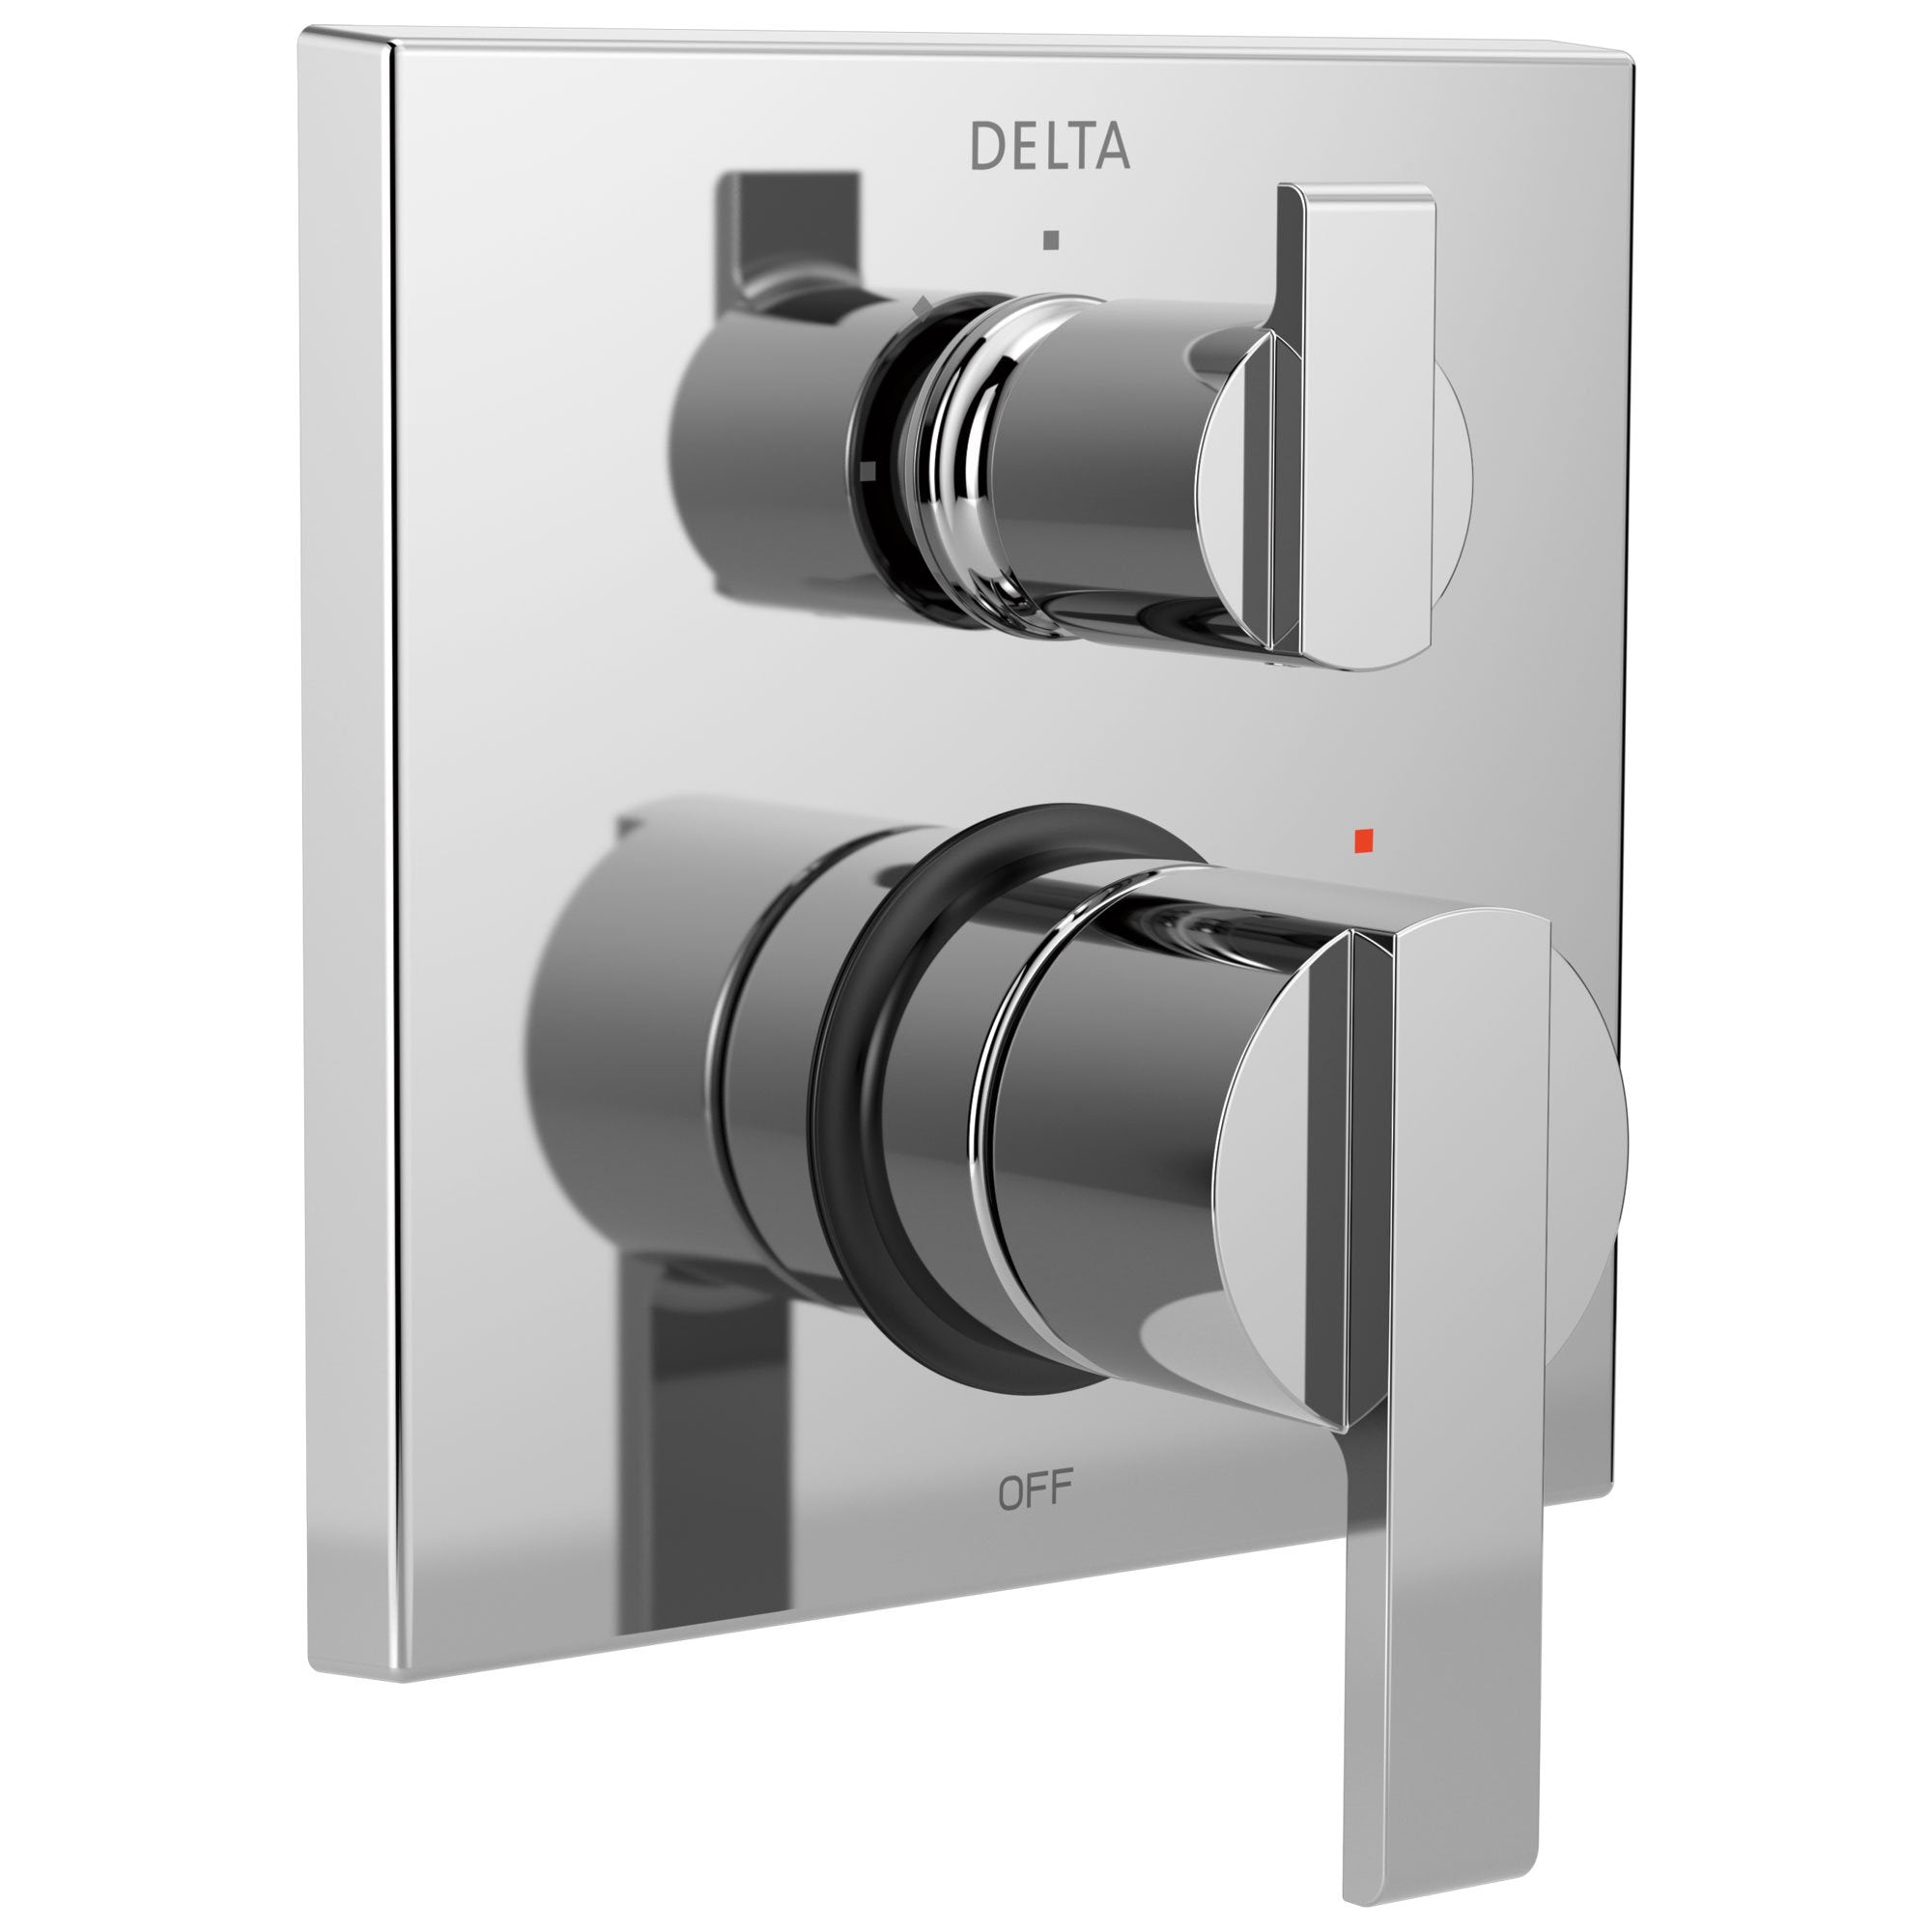 Delta Ara Chrome Modern Monitor 14 Shower Faucet Valve Trim Control Handle with 3-Setting Integrated Diverter Includes Trim Kit and Valve with Stops D2213V